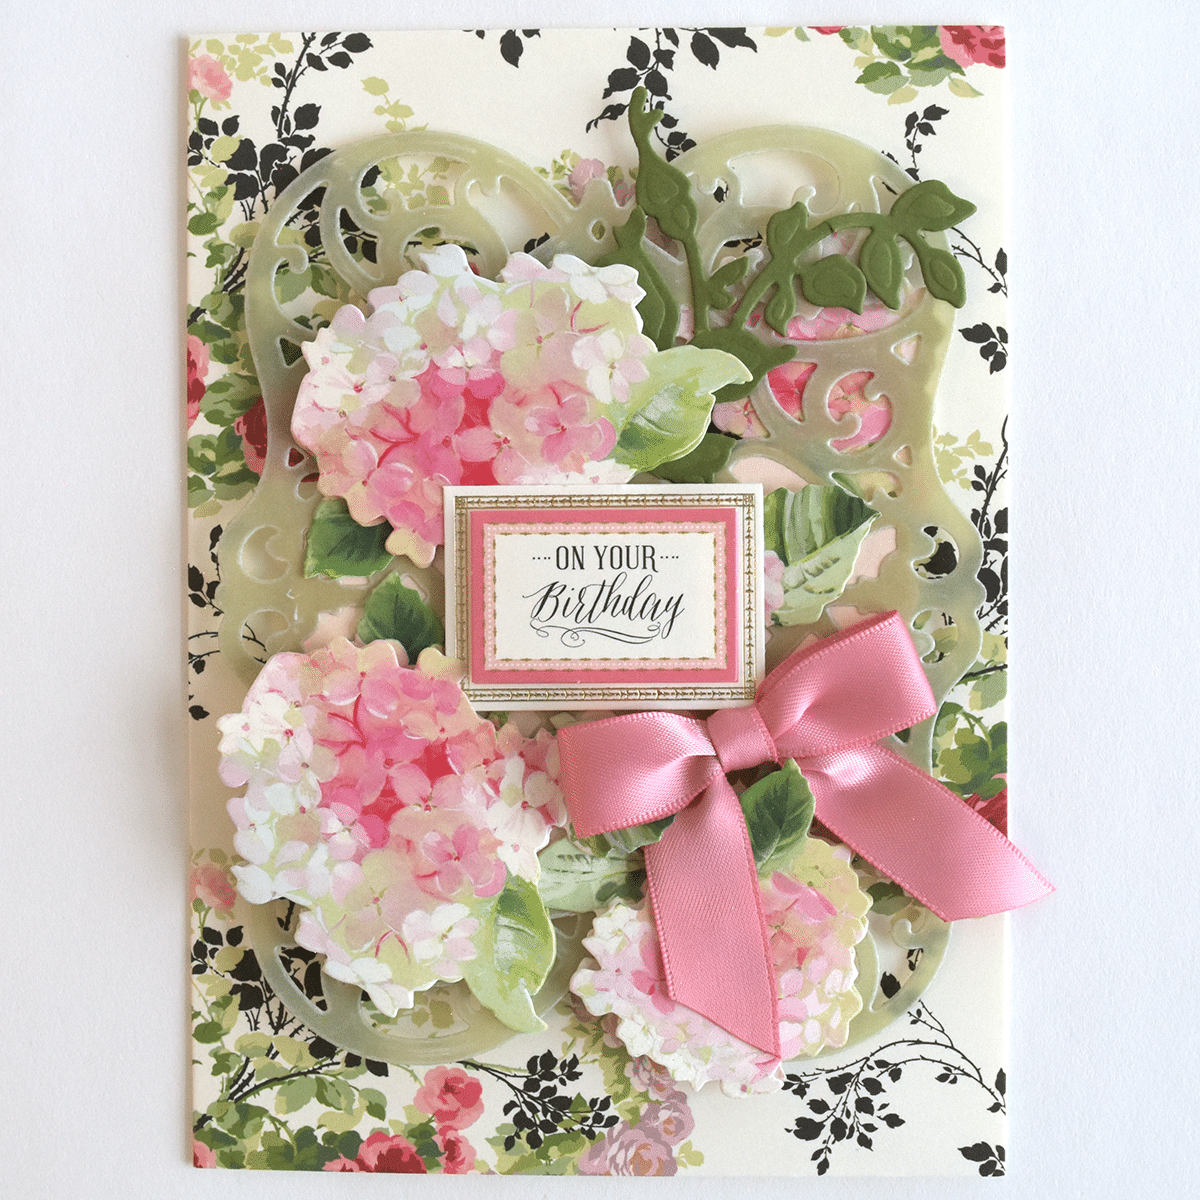 a birthday card with pink flowers and a pink ribbon.